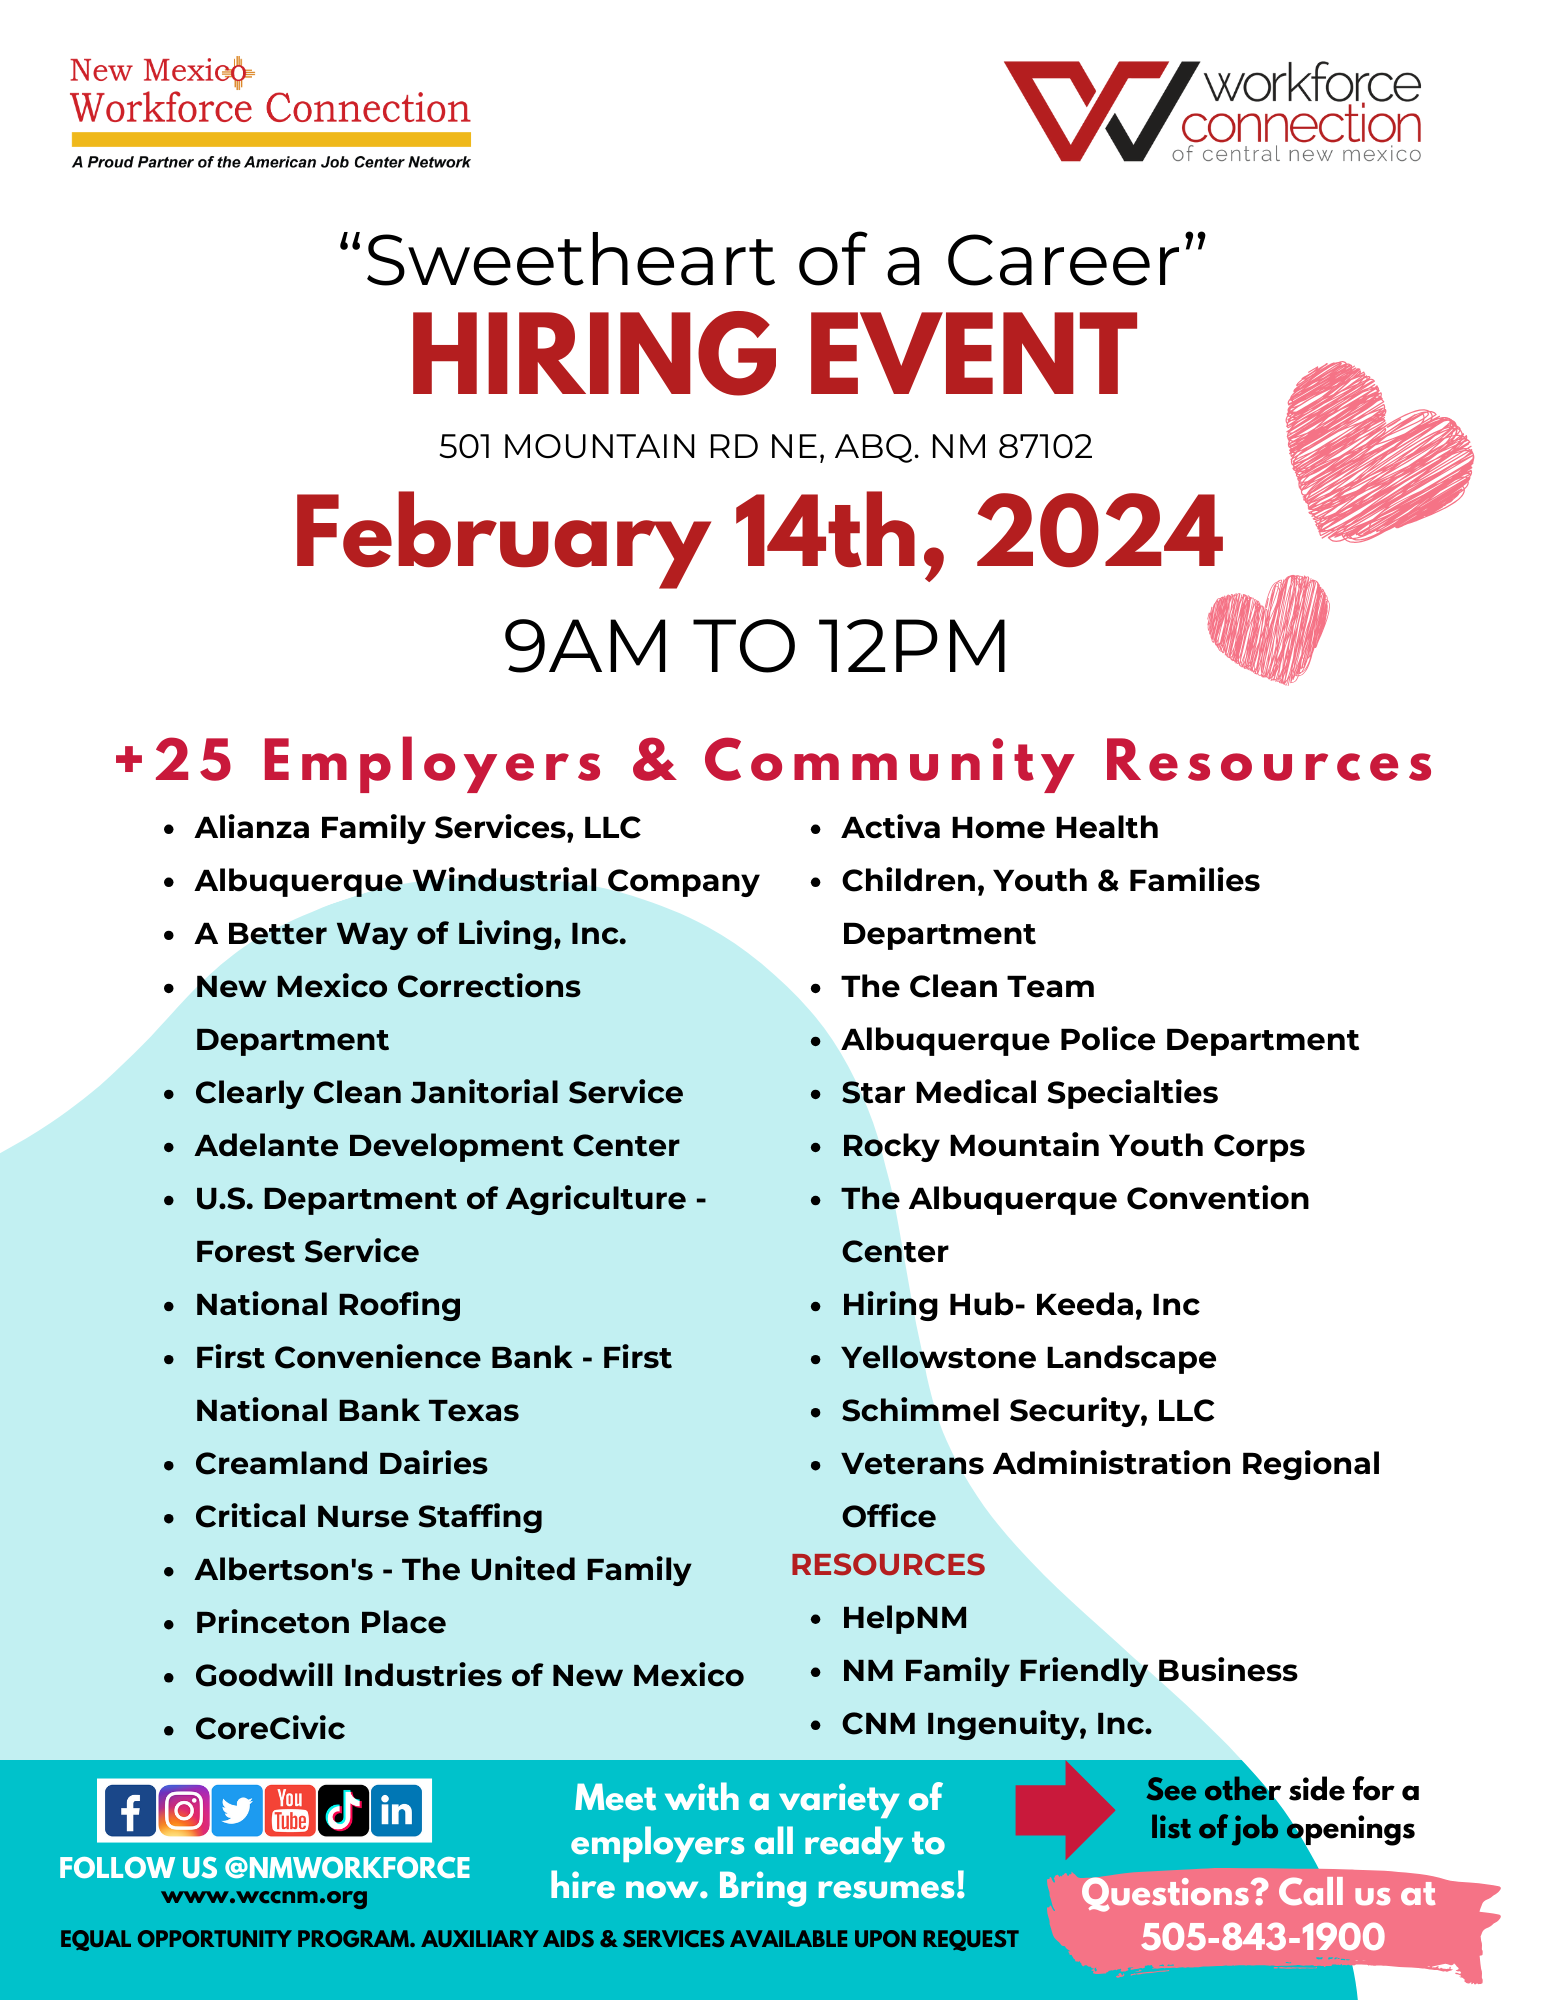 Sweetheart of a Career Hiring Event flyer